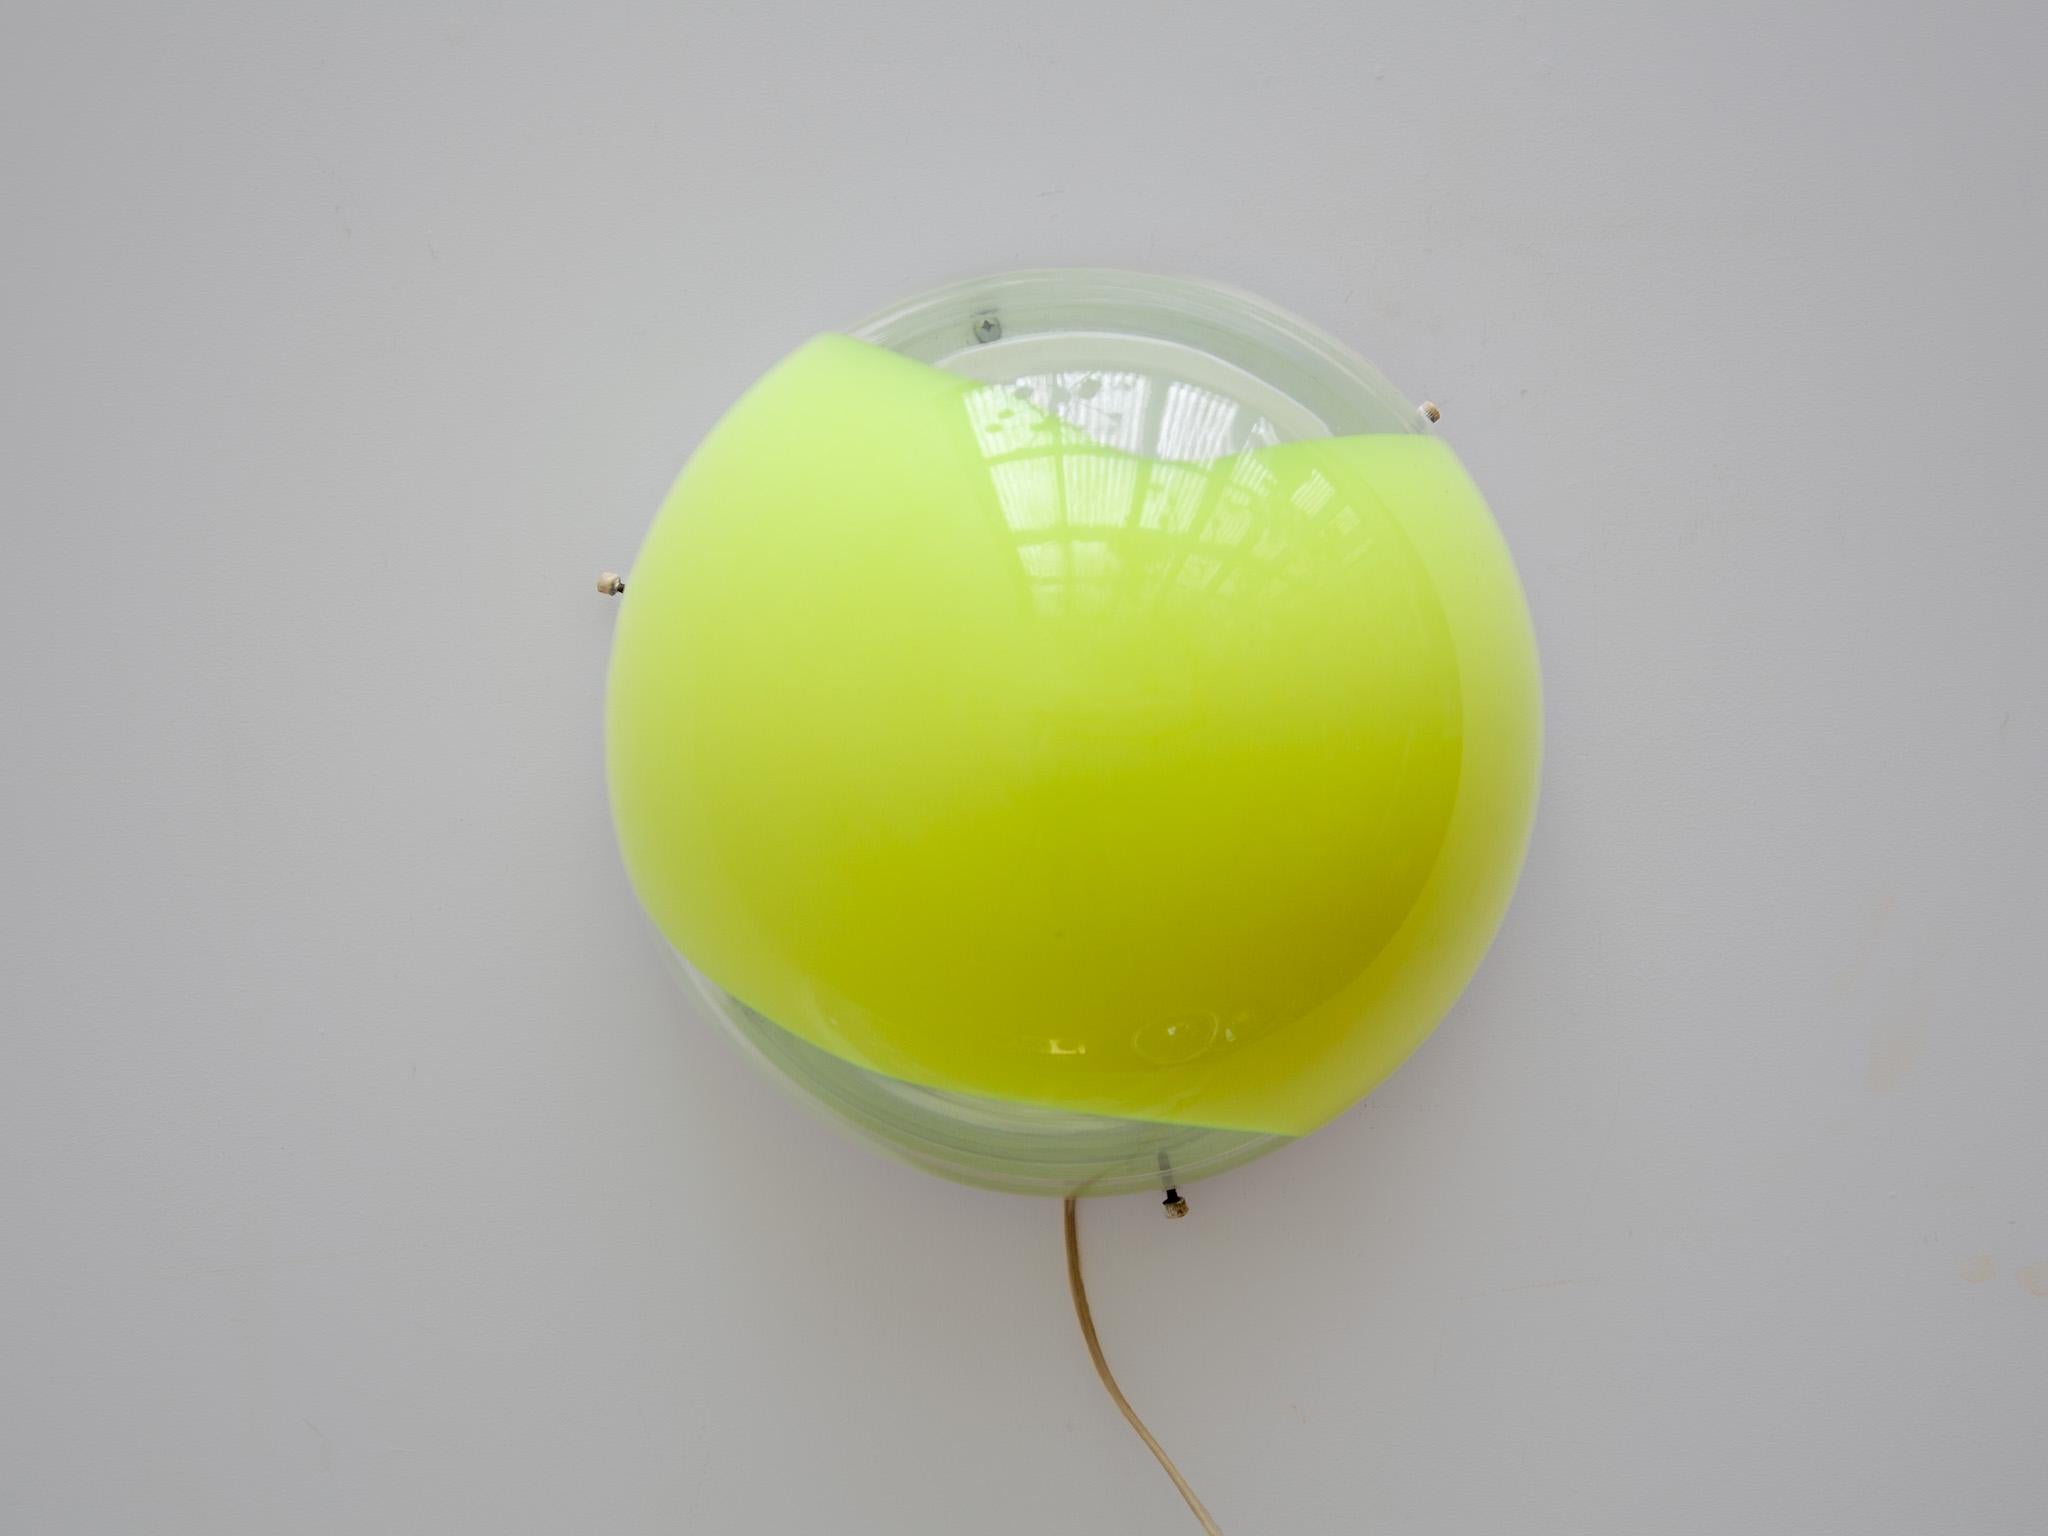 Rare wall light or sconce consisting of a half sphere of clear glass with a warm yellow opal swirl blown inside, designed in Murano by vistosi 1960s, mounted on a metal white lacquered wall plate.